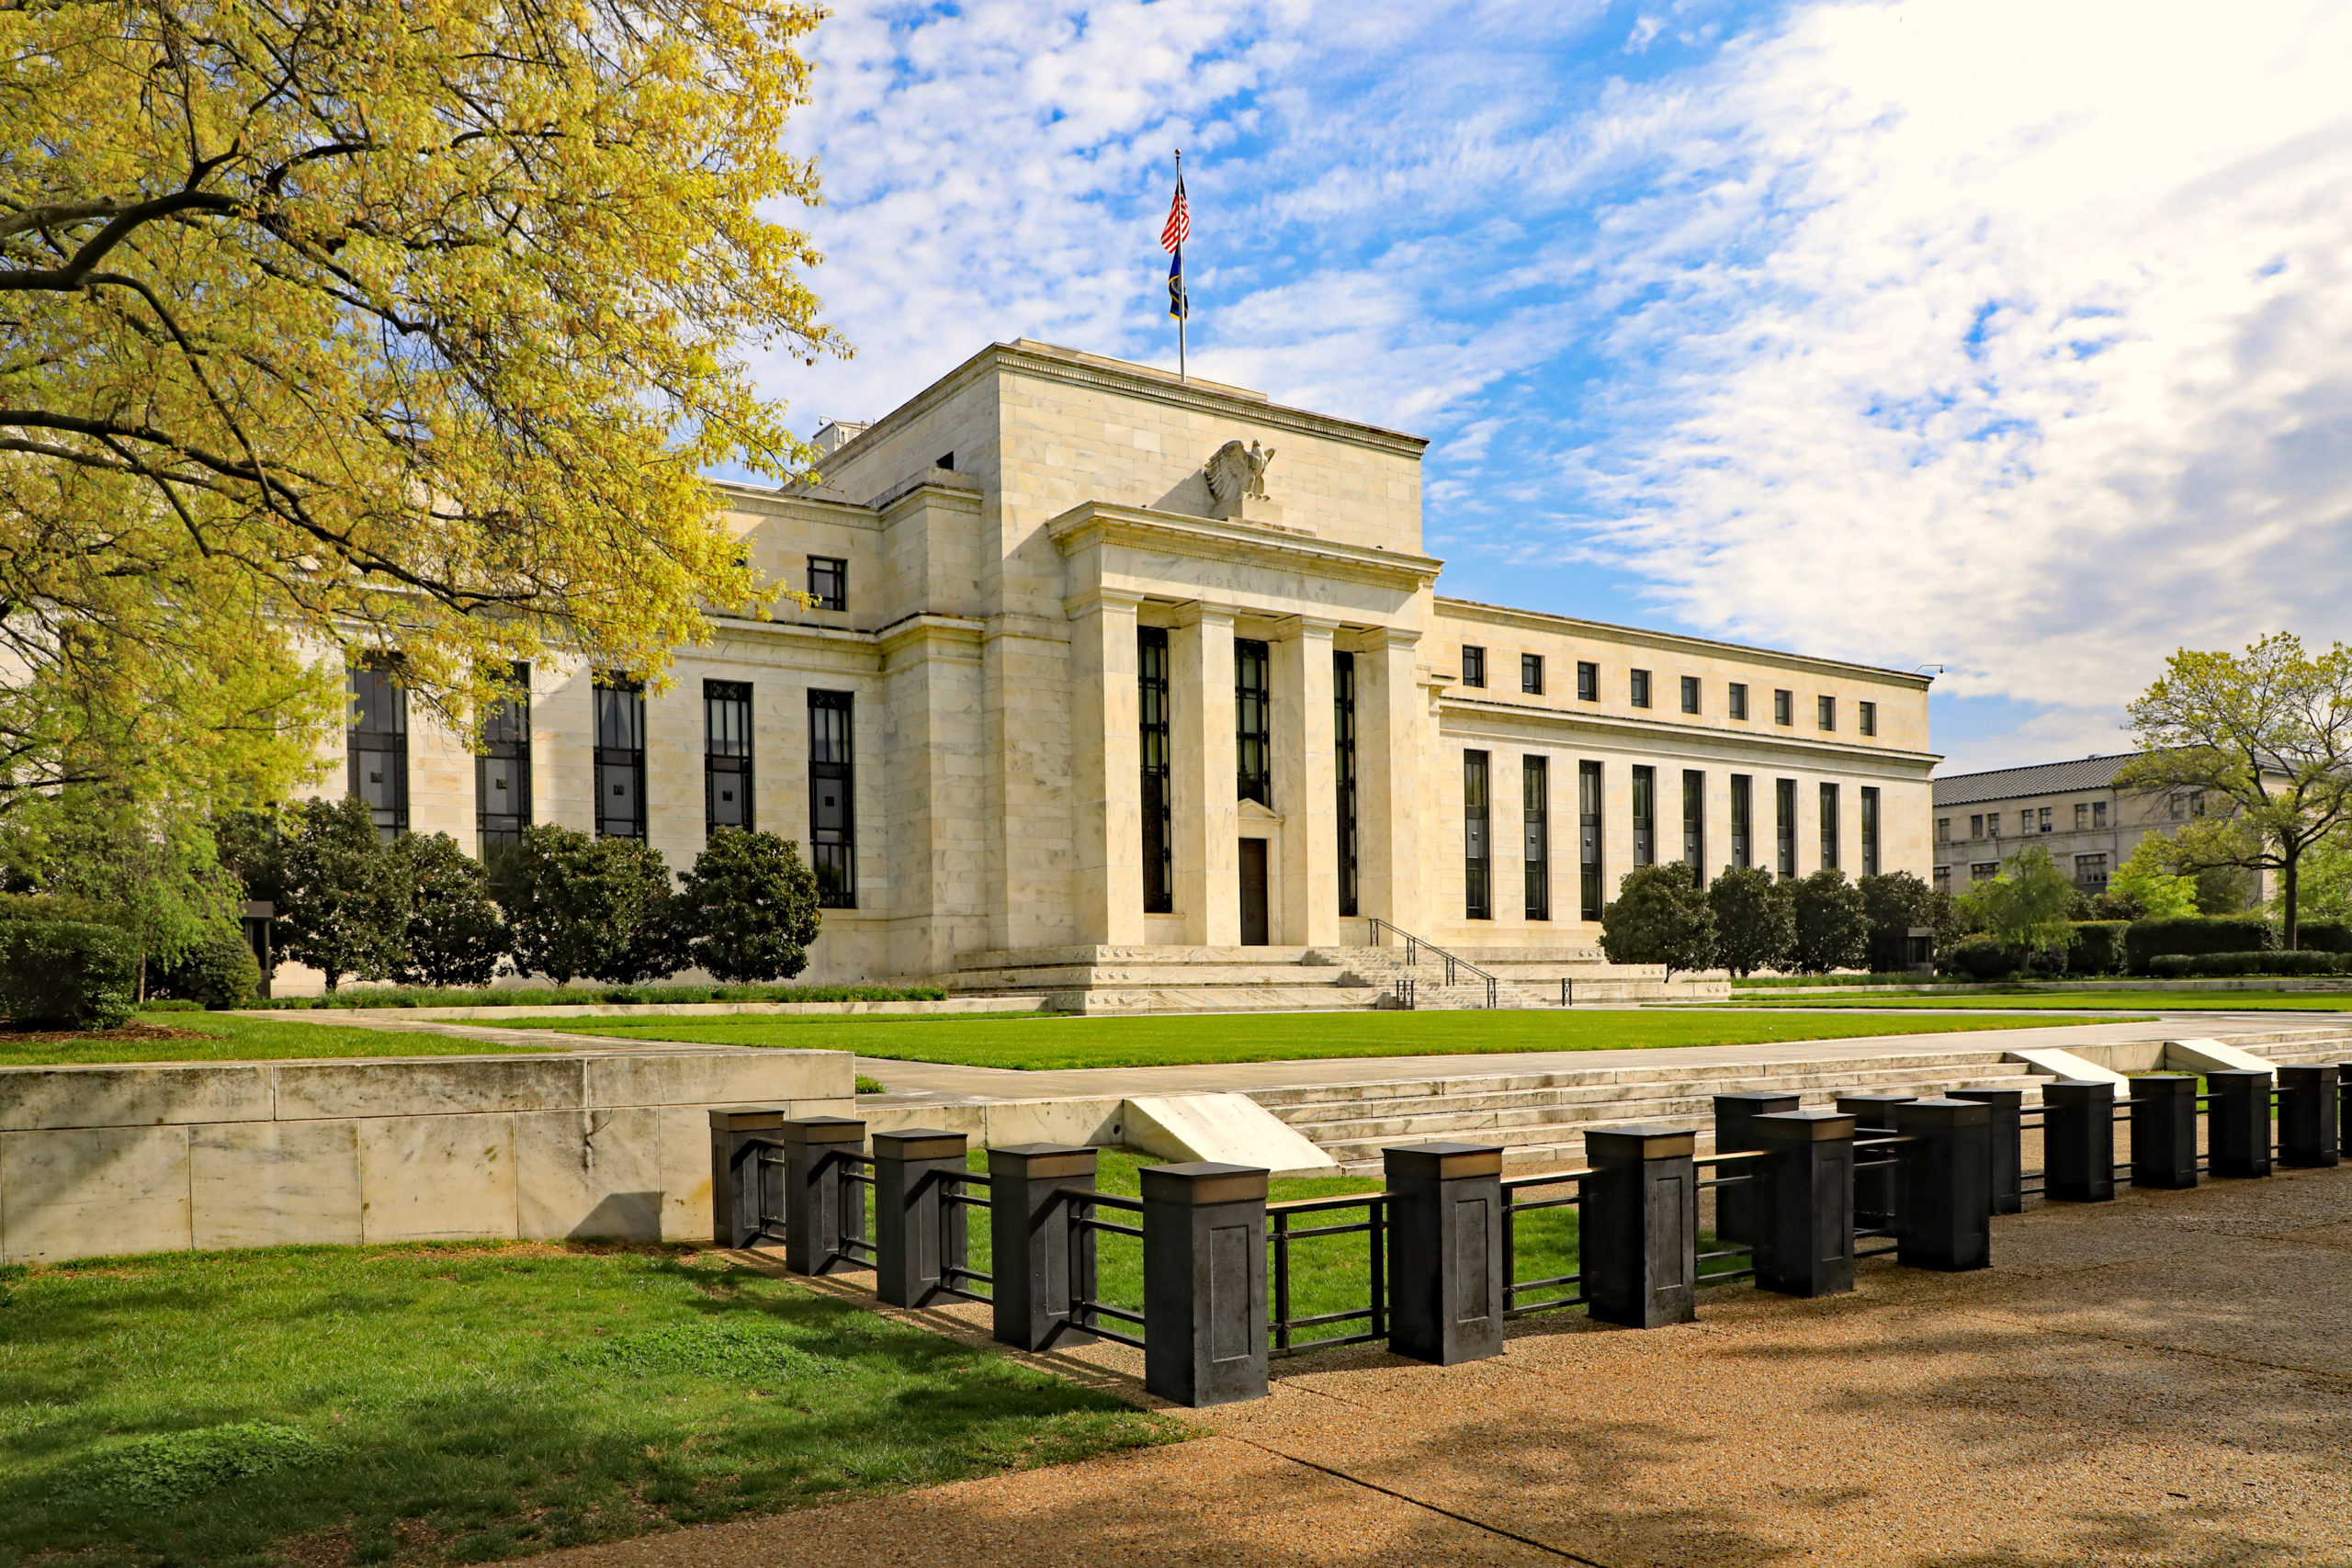 Federal Reserve bank of DC